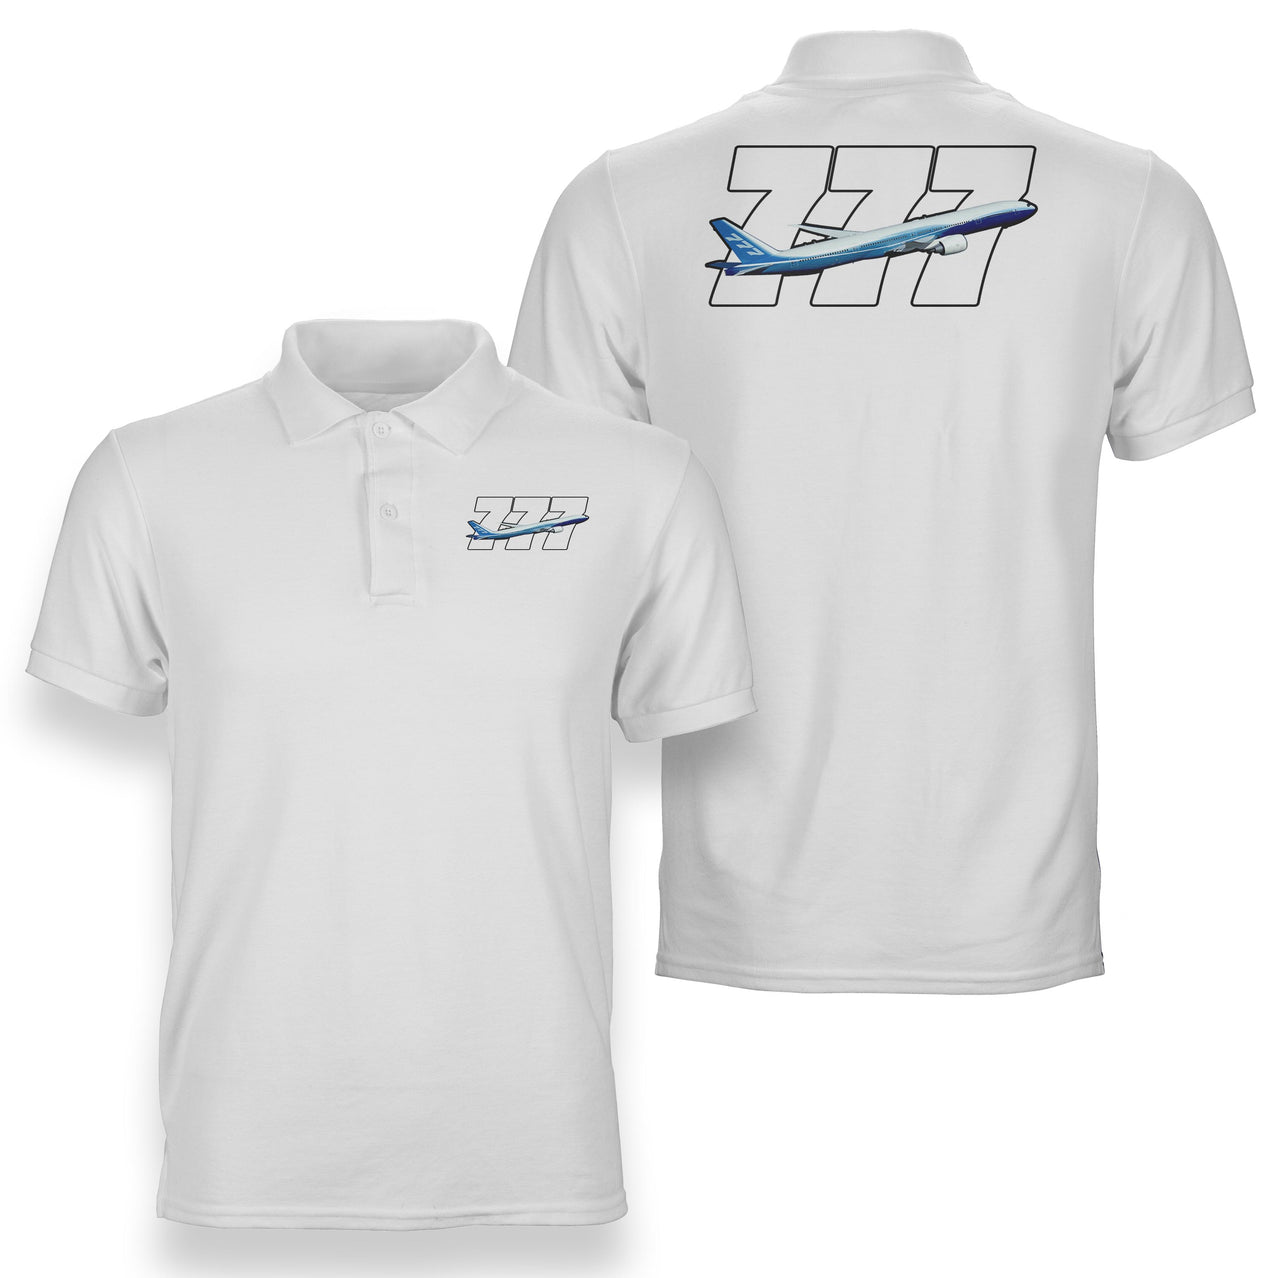 Super Boeing 777 Designed Double Side Polo T-Shirts